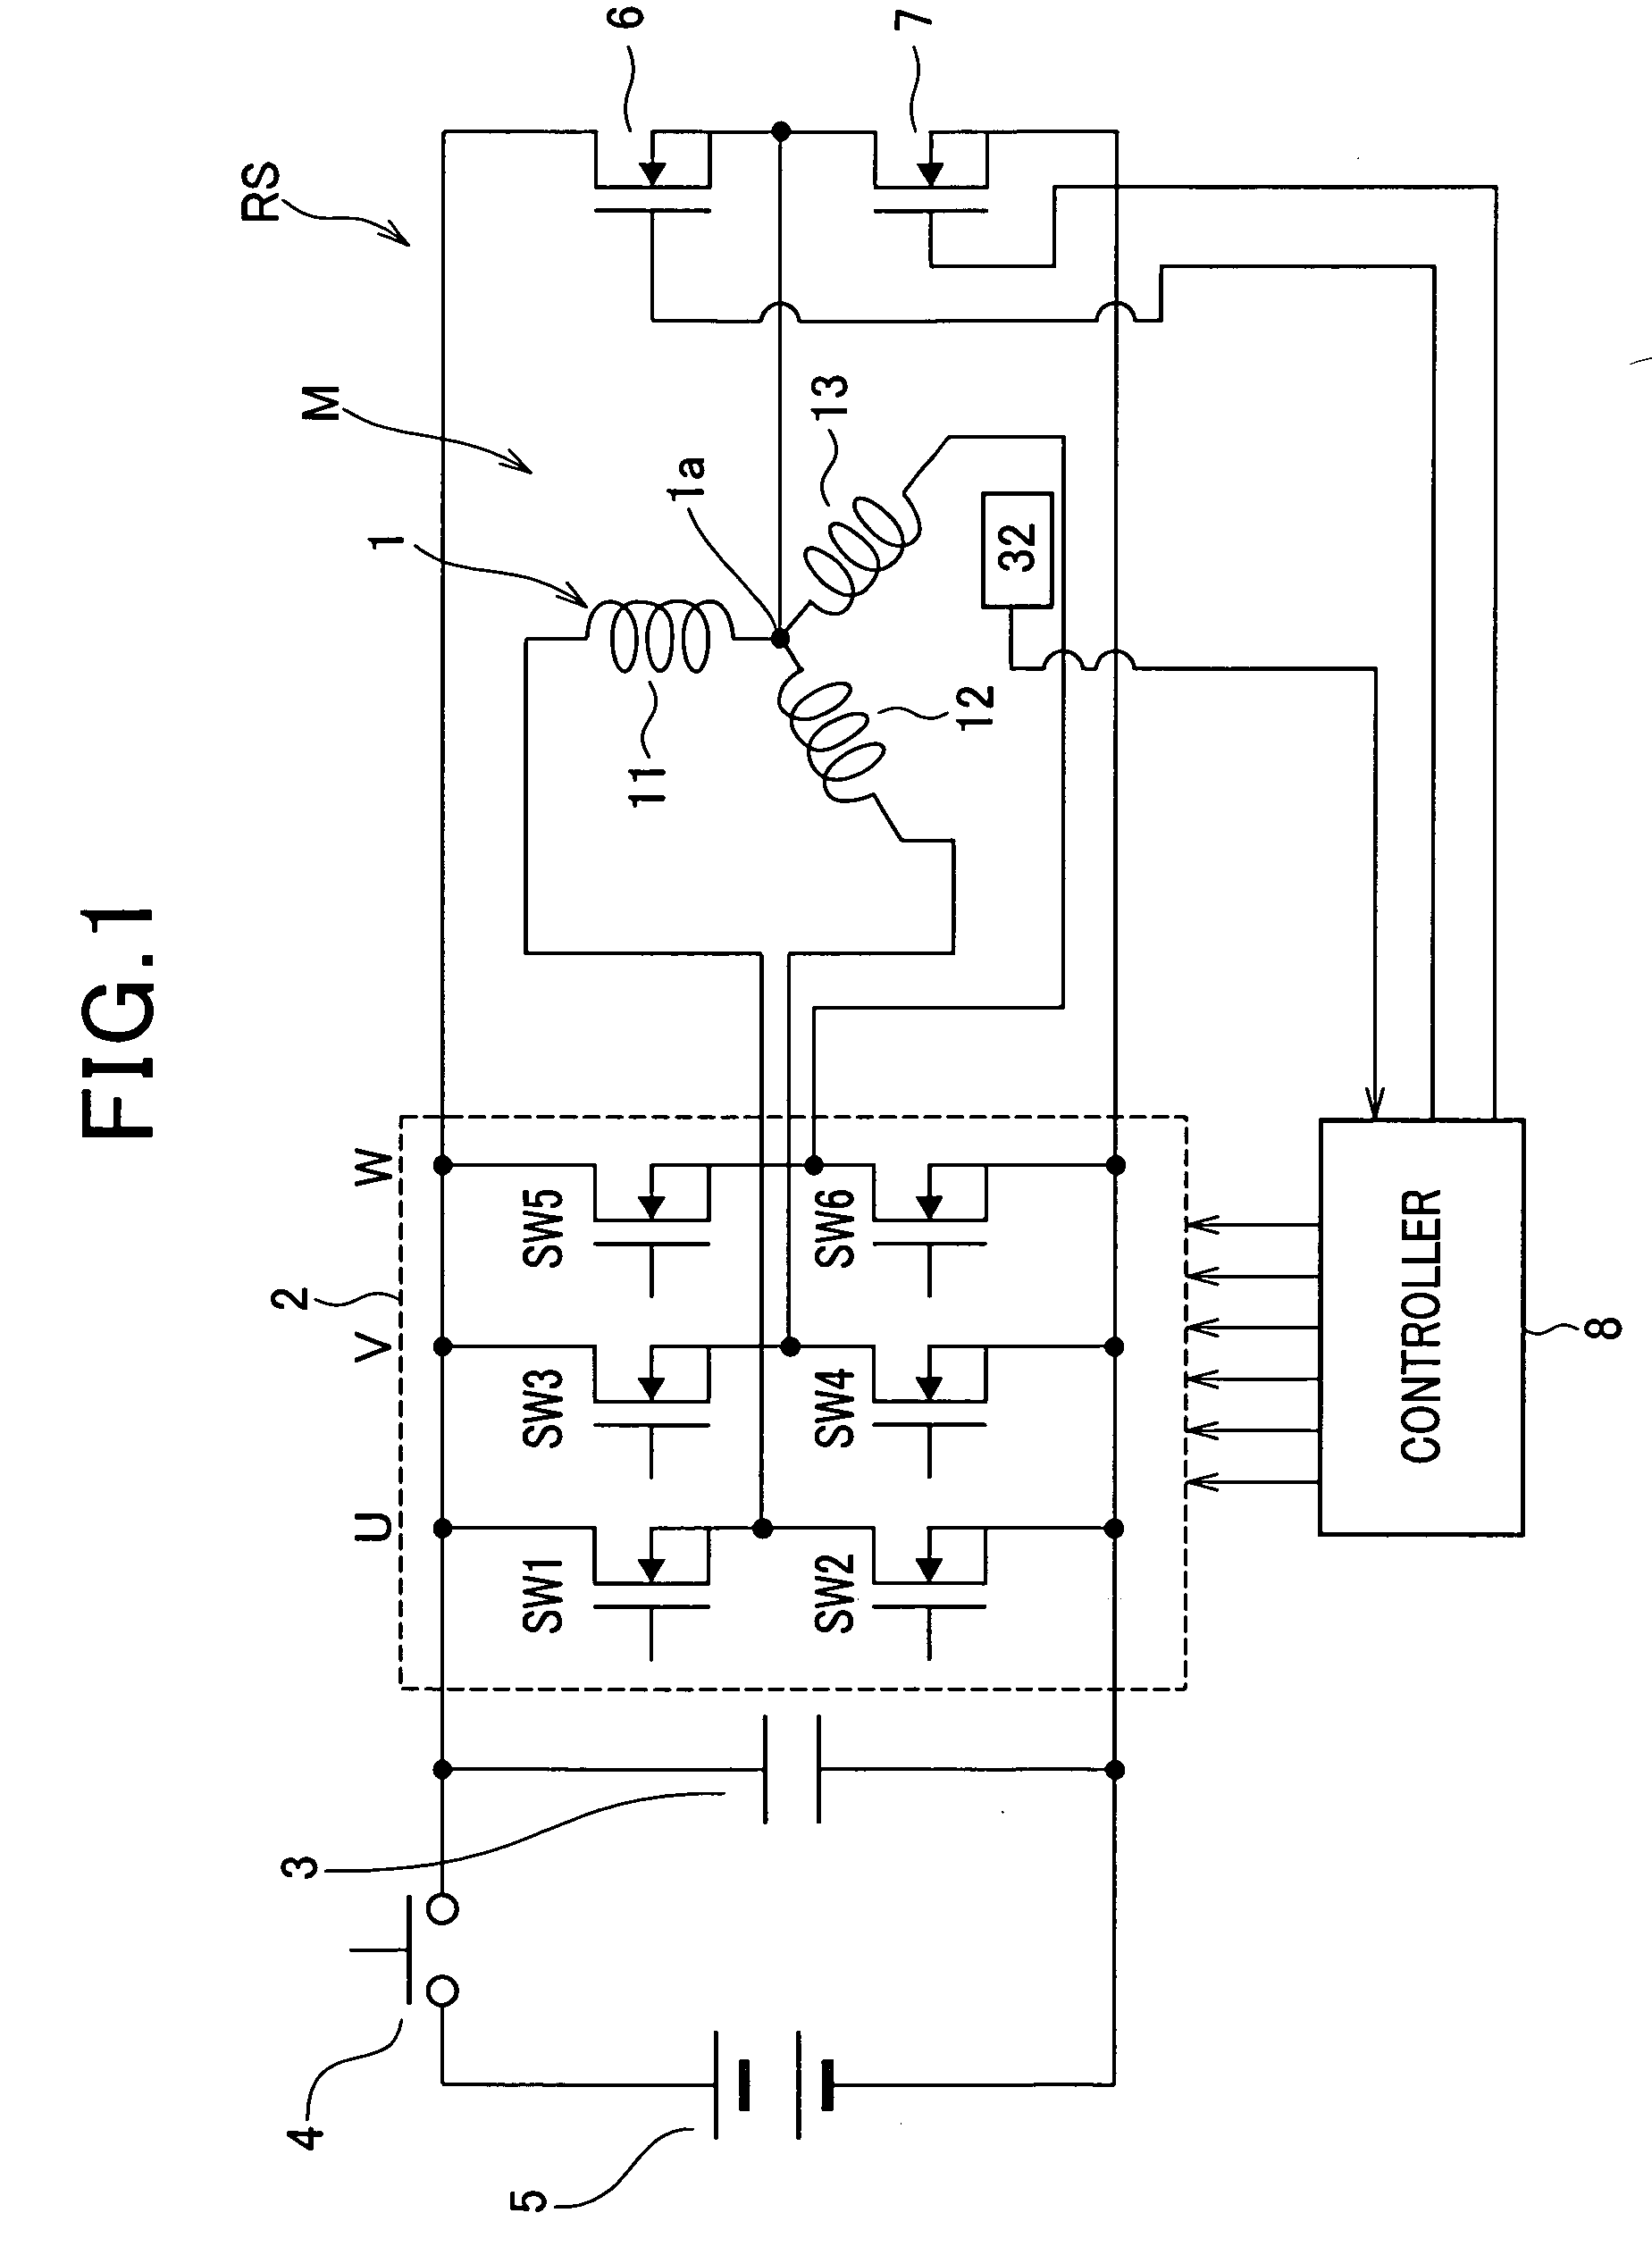 Rotary electric system with star-connected multiphase stator windings